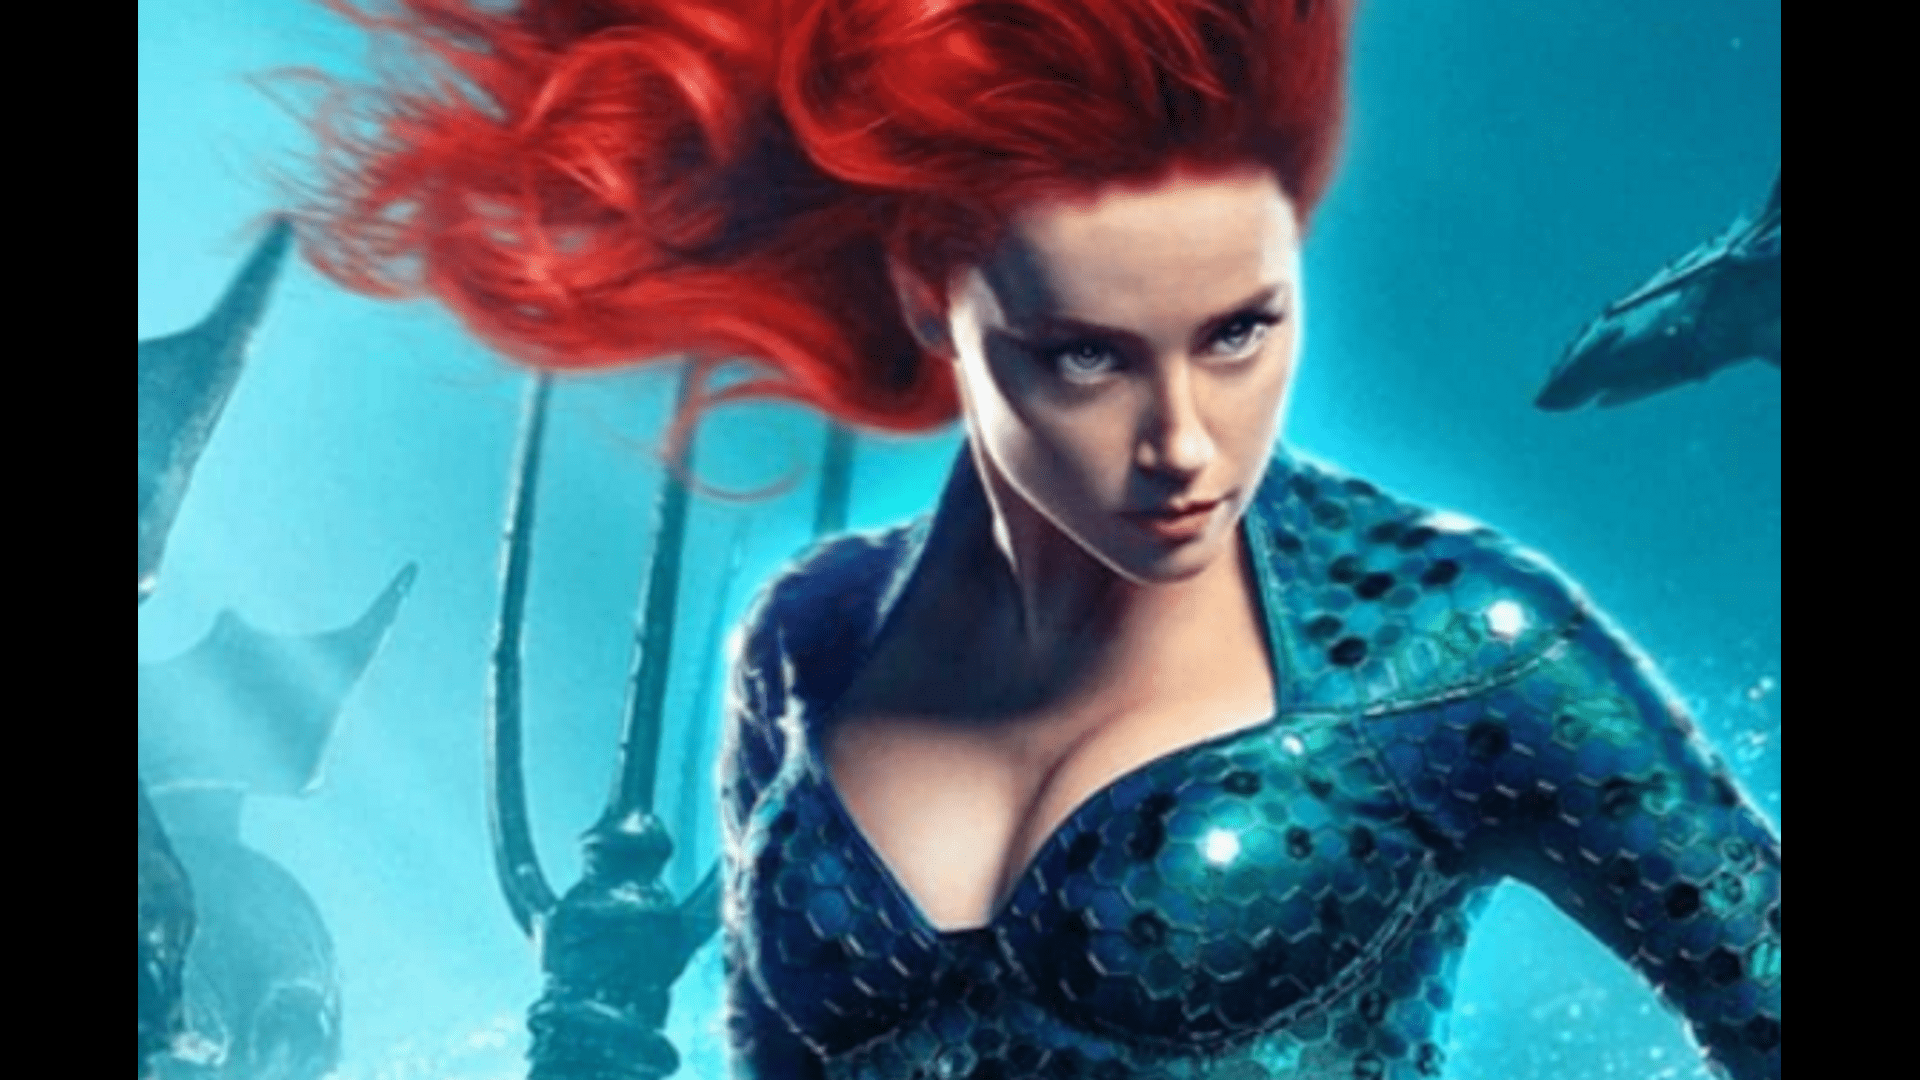 Amber Heard was rejected from Aquaman 2 due to chemistry with Jason Momoa